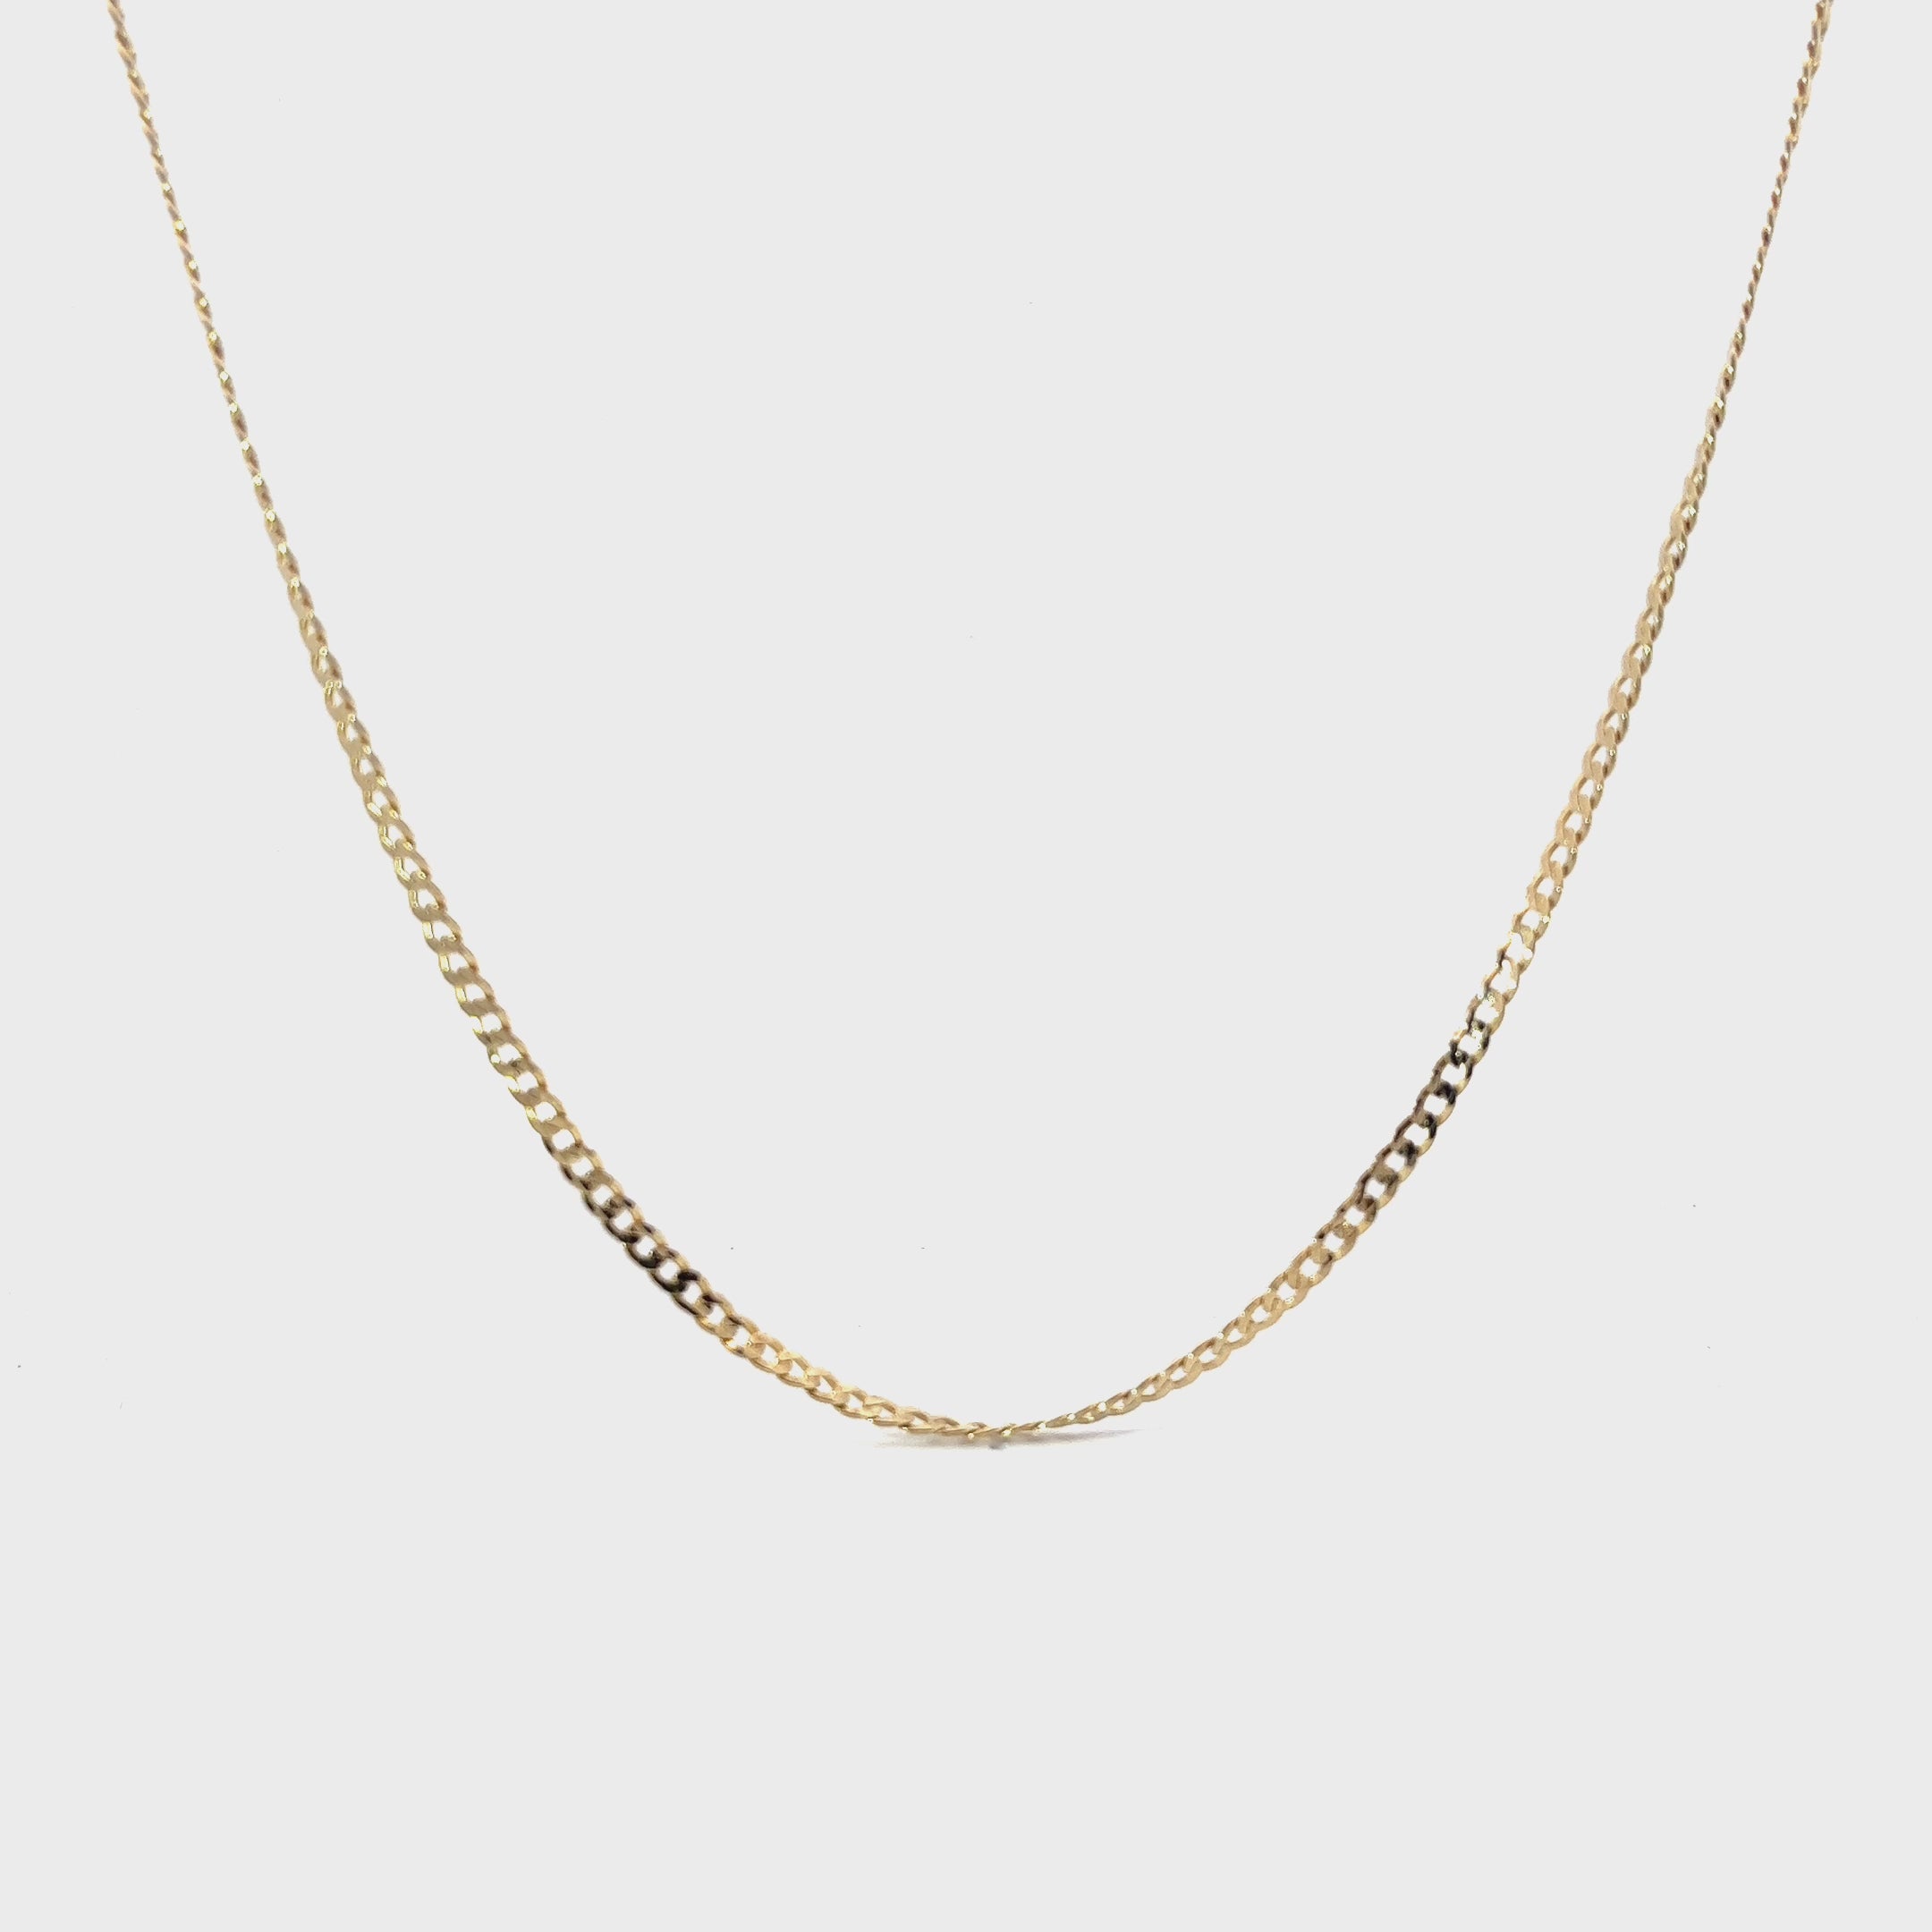 14k yellow gold 8.5gram open curb necklace 20"inch 3.25mm